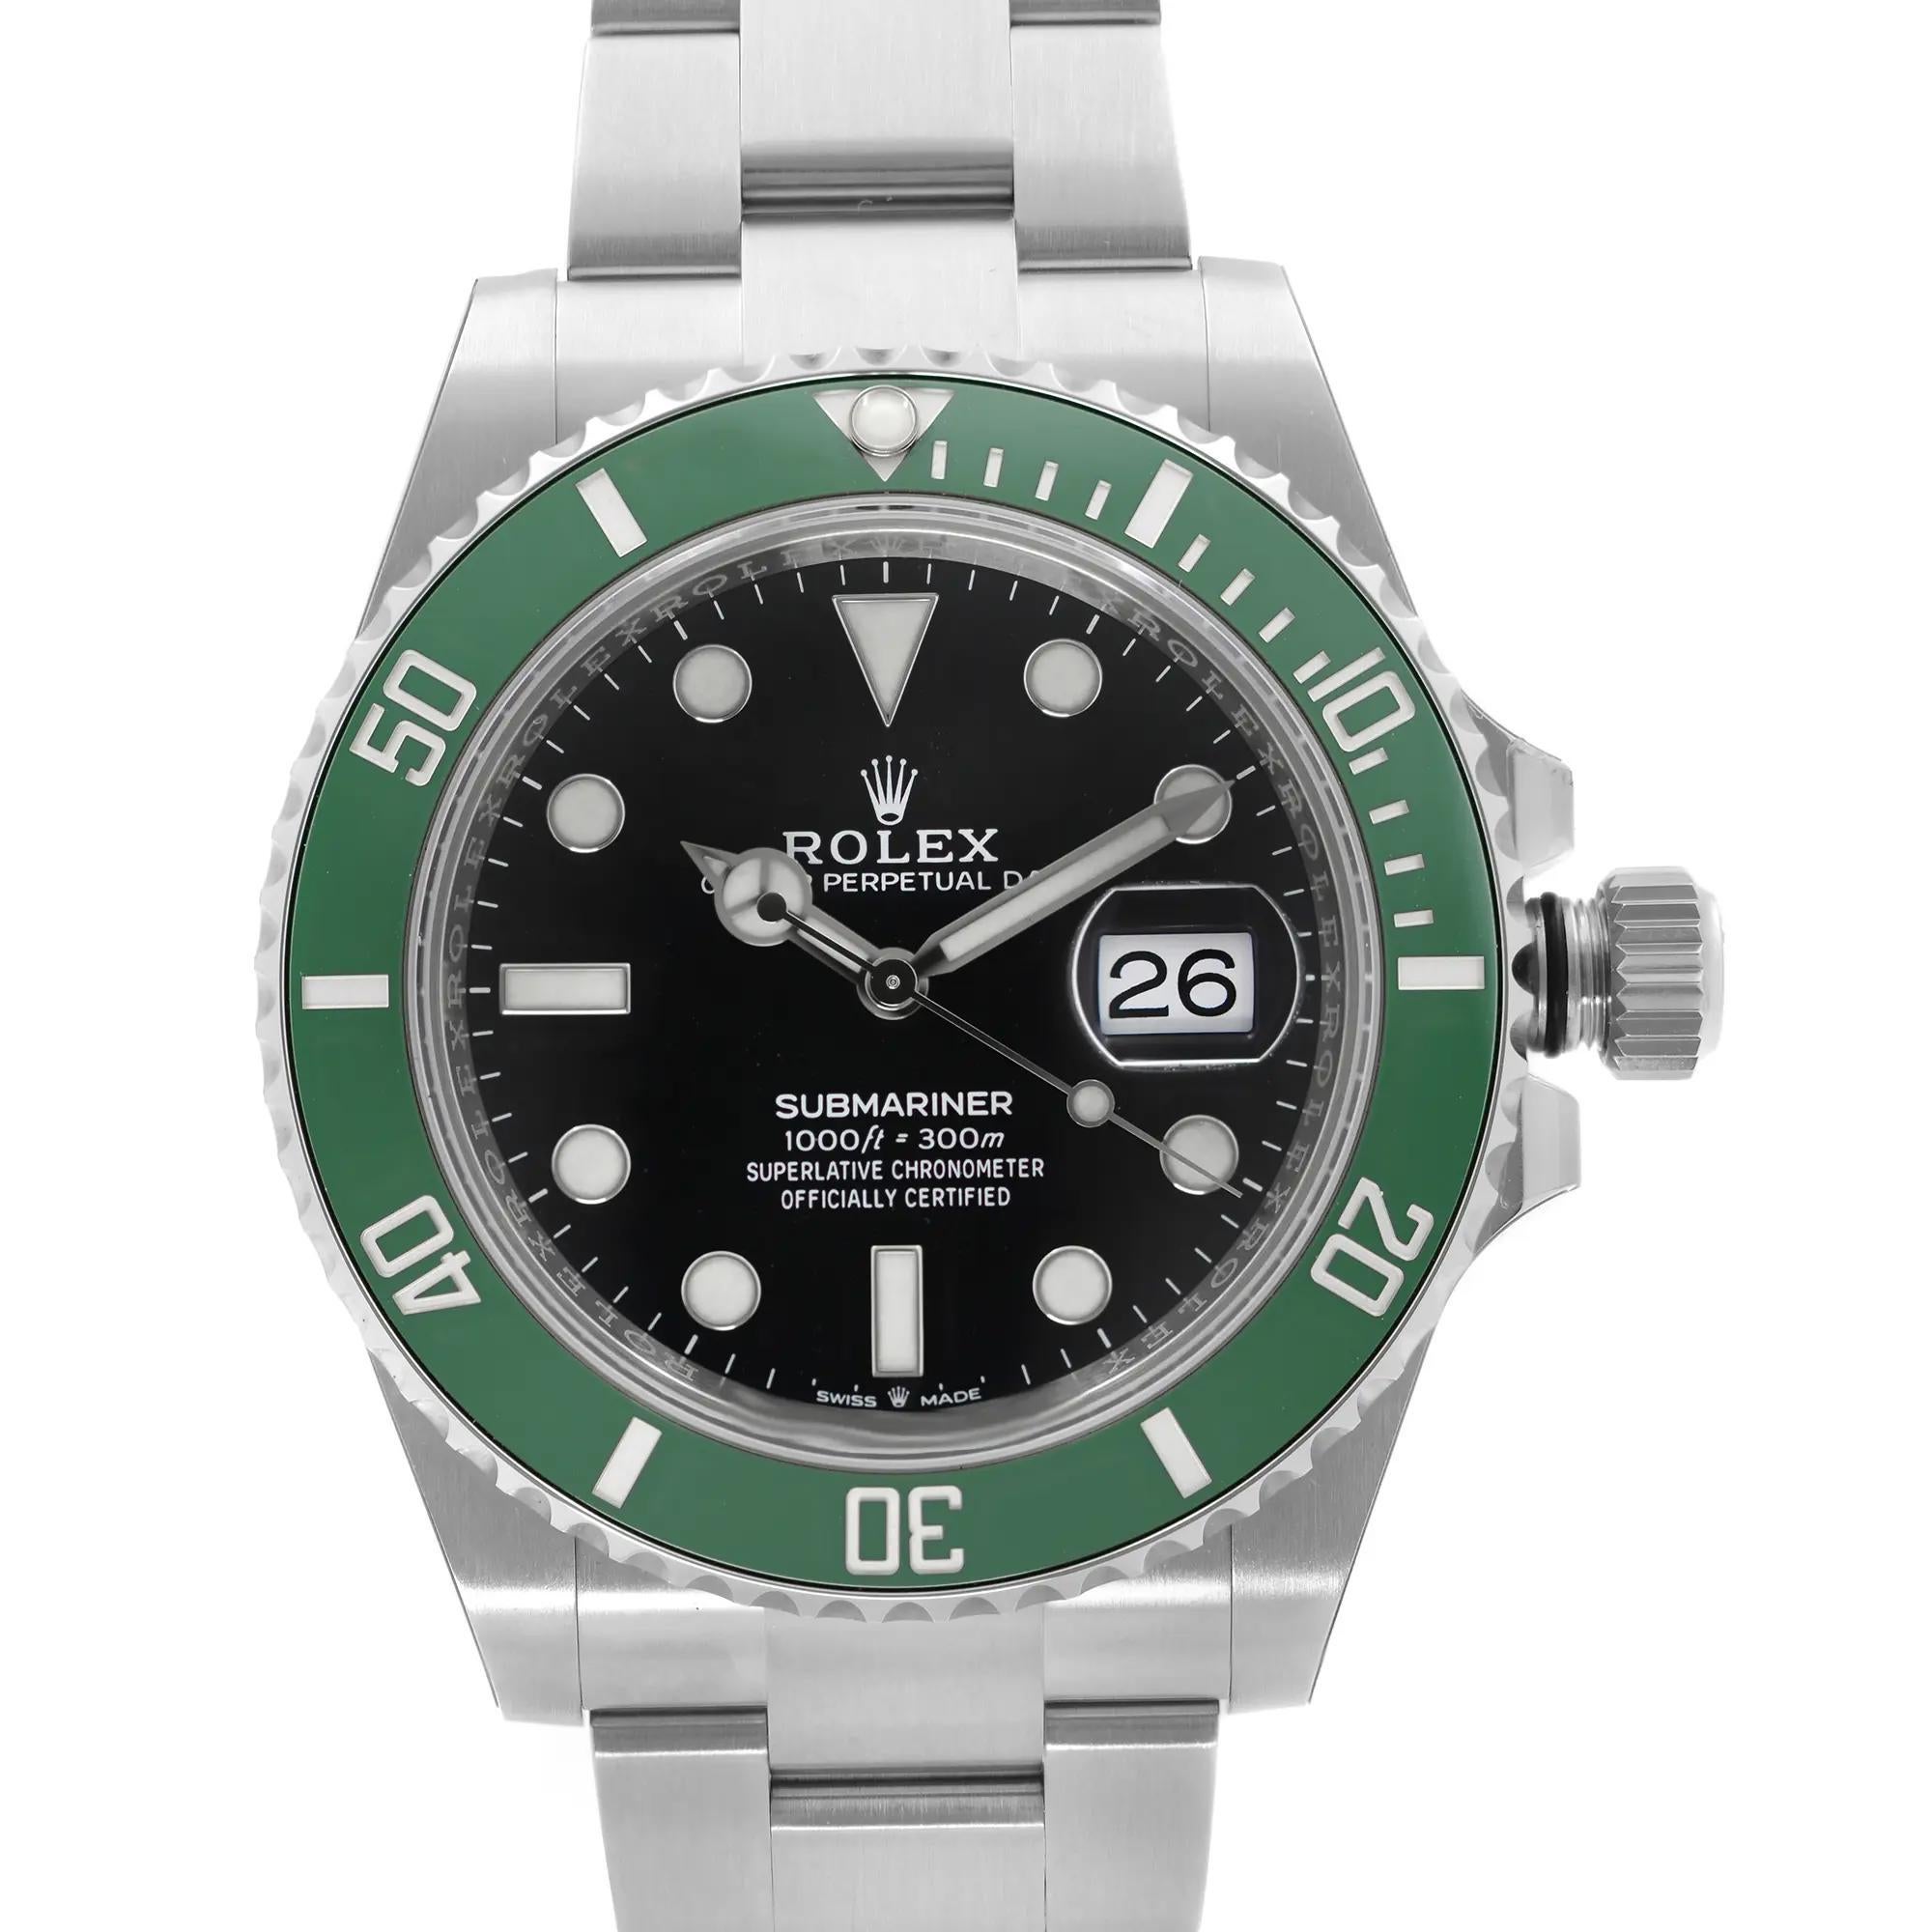 Pre-owned in excellent condition. 2022 card. Comes with the original box and papers.

Brand: Rolex
Type: Wristwatch
Department: Men
Model: Rolex Submariner 126610LV
Model Number: 126610LV
Country/Region of Manufacture: Switzerland
Style: